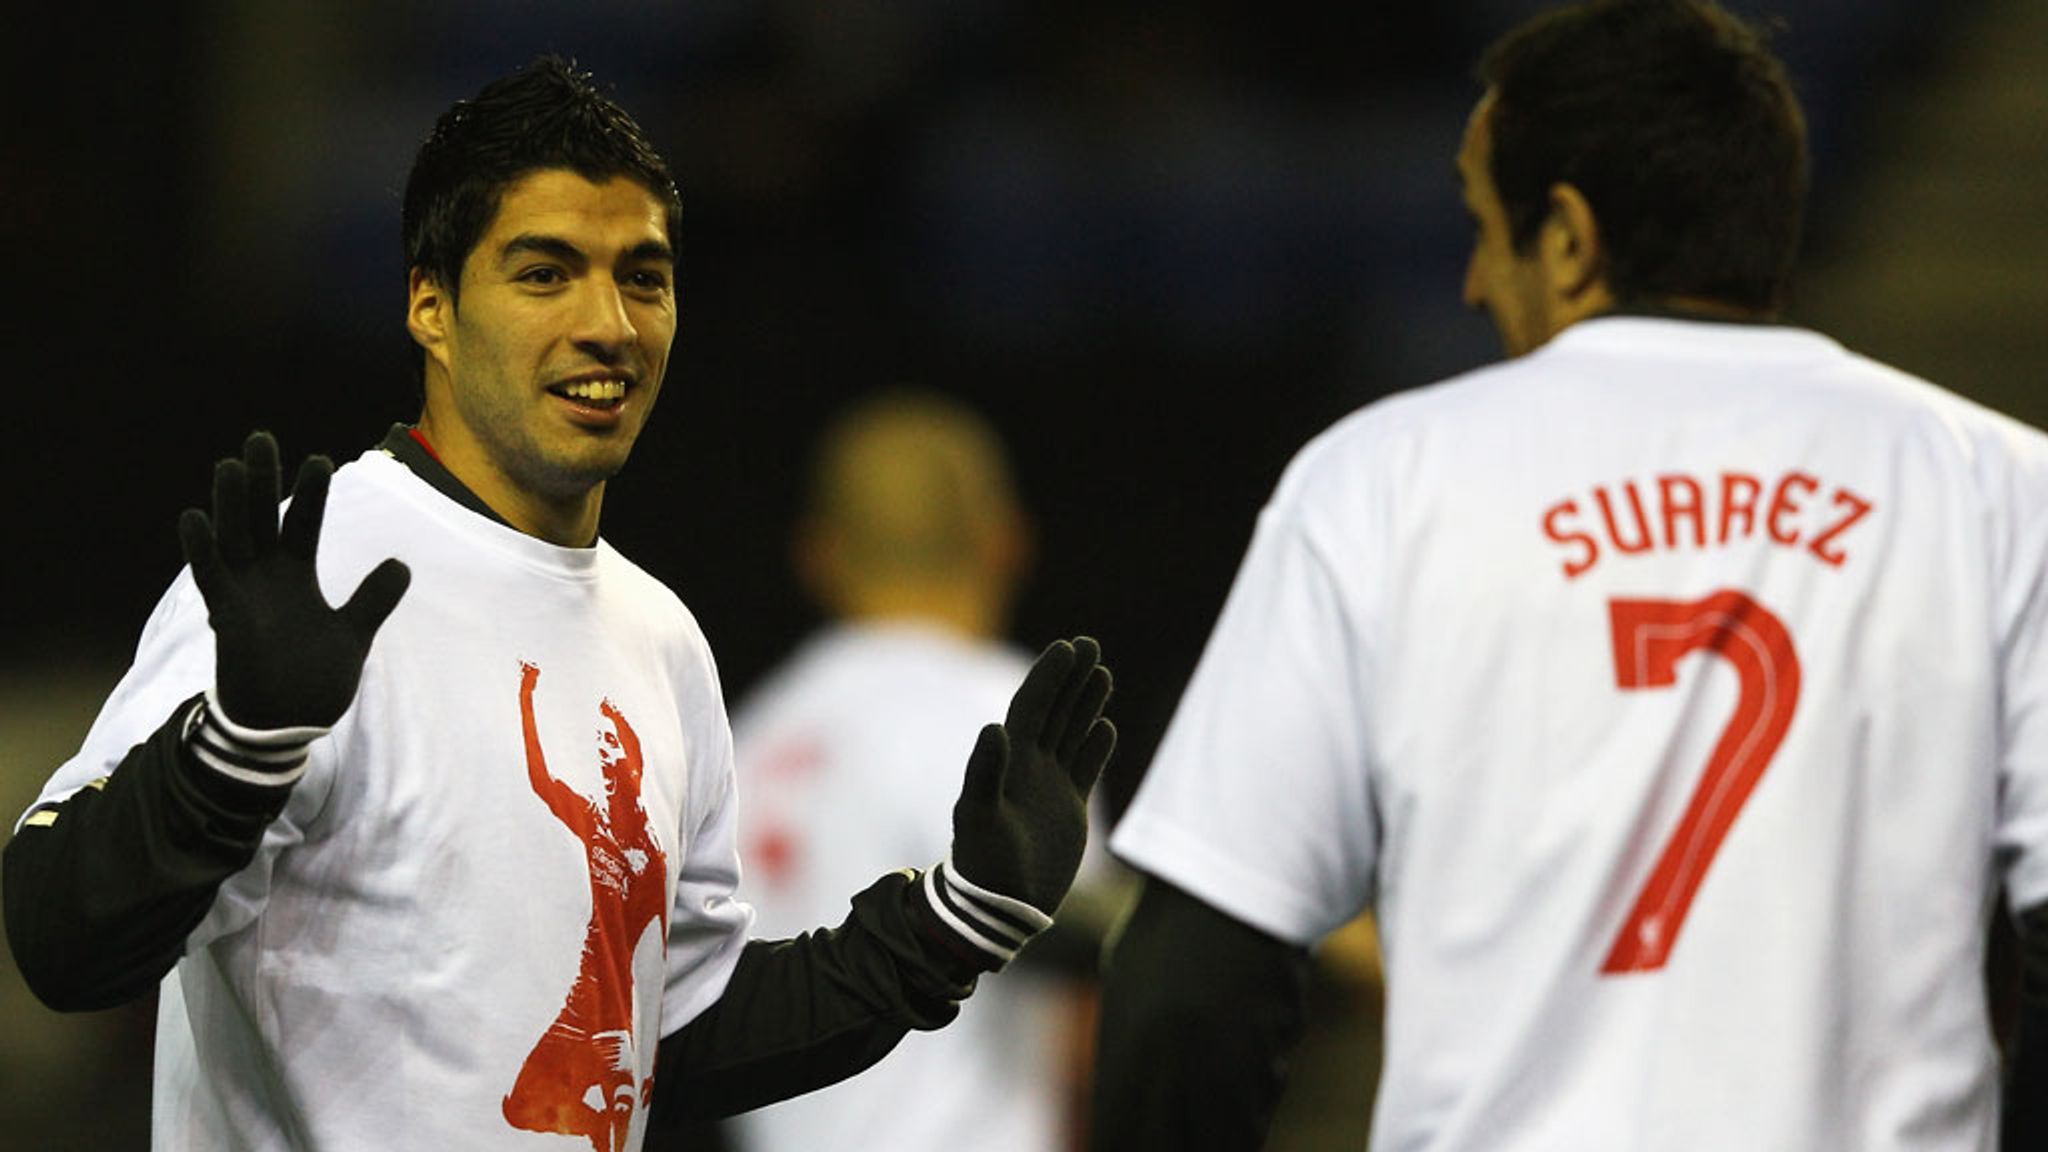 Kostuums Ontvangst Immigratie Kenny Dalglish says Liverpool were not instructed to wear Luis Suarez  T-shirts | Football News | Sky Sports